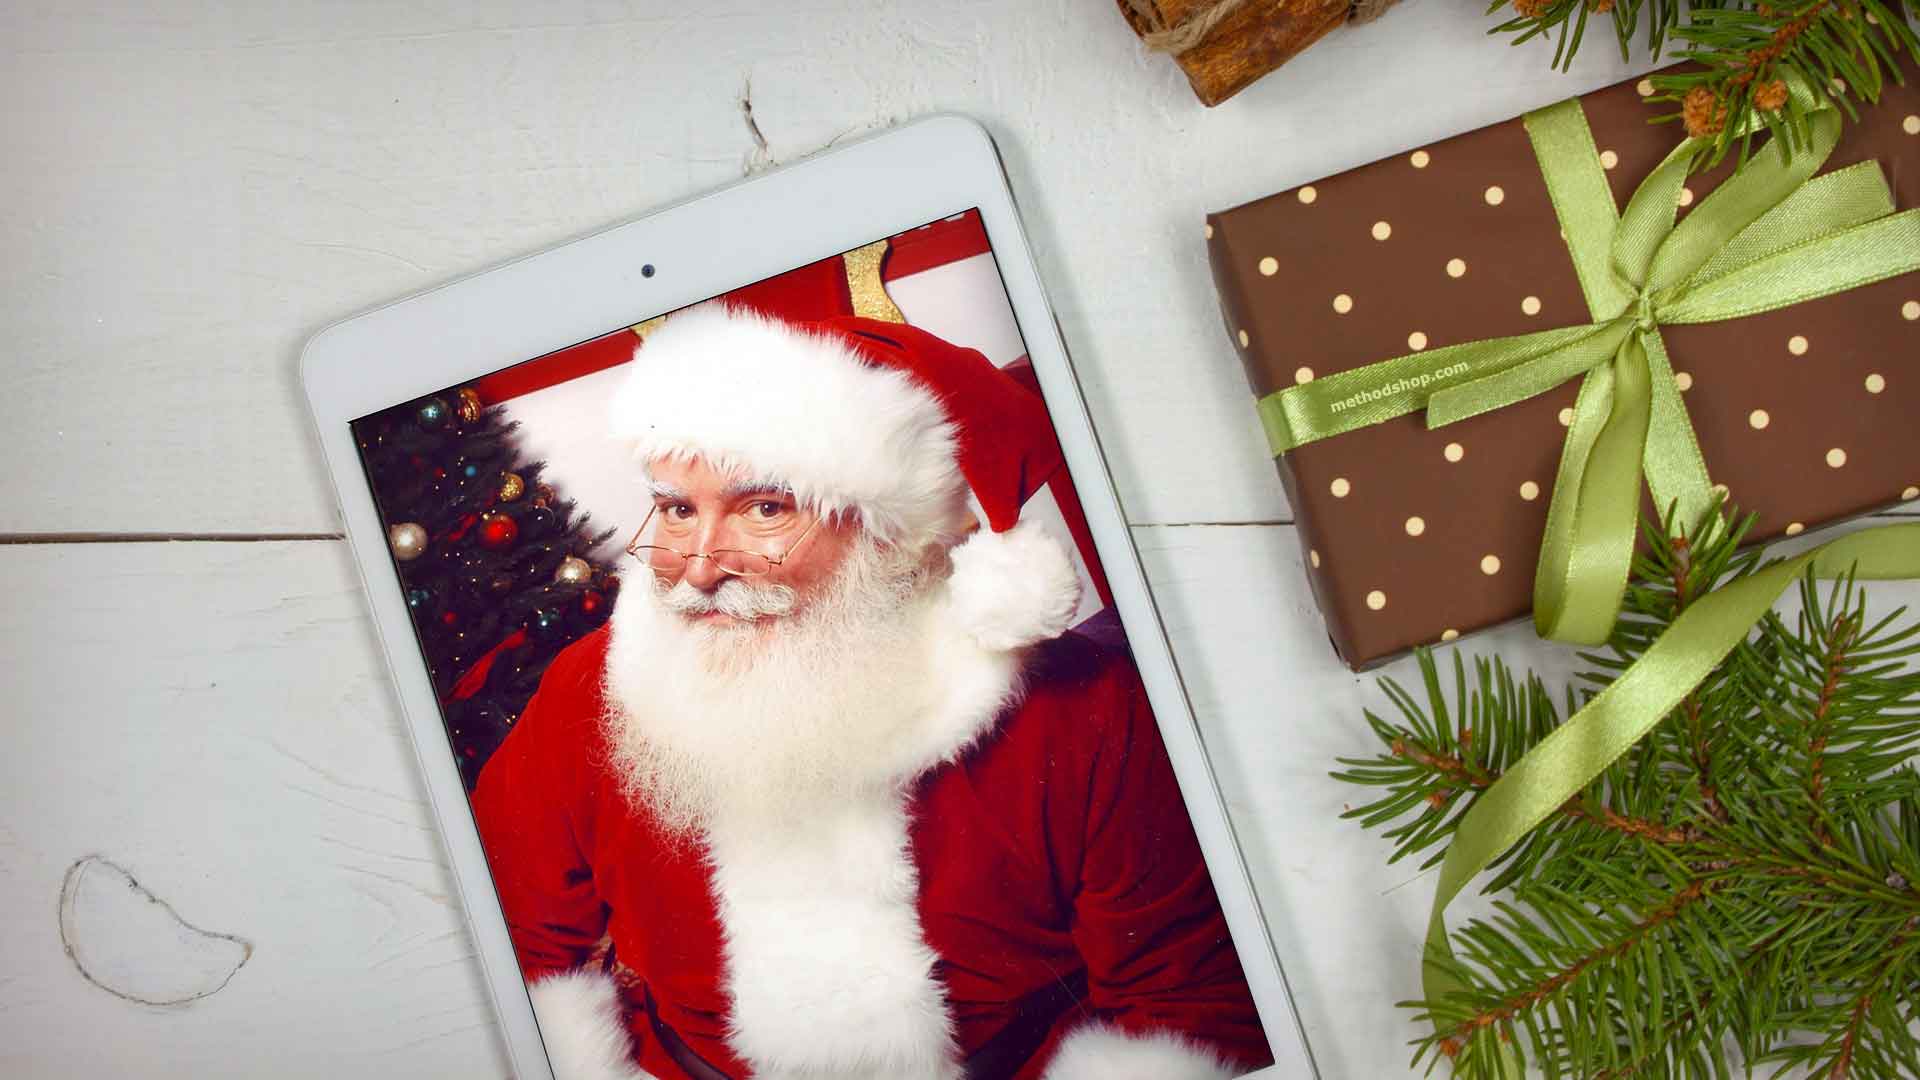 Top 10 iPad and iPhone Gadgets You Wish You Got as Holiday Gifts